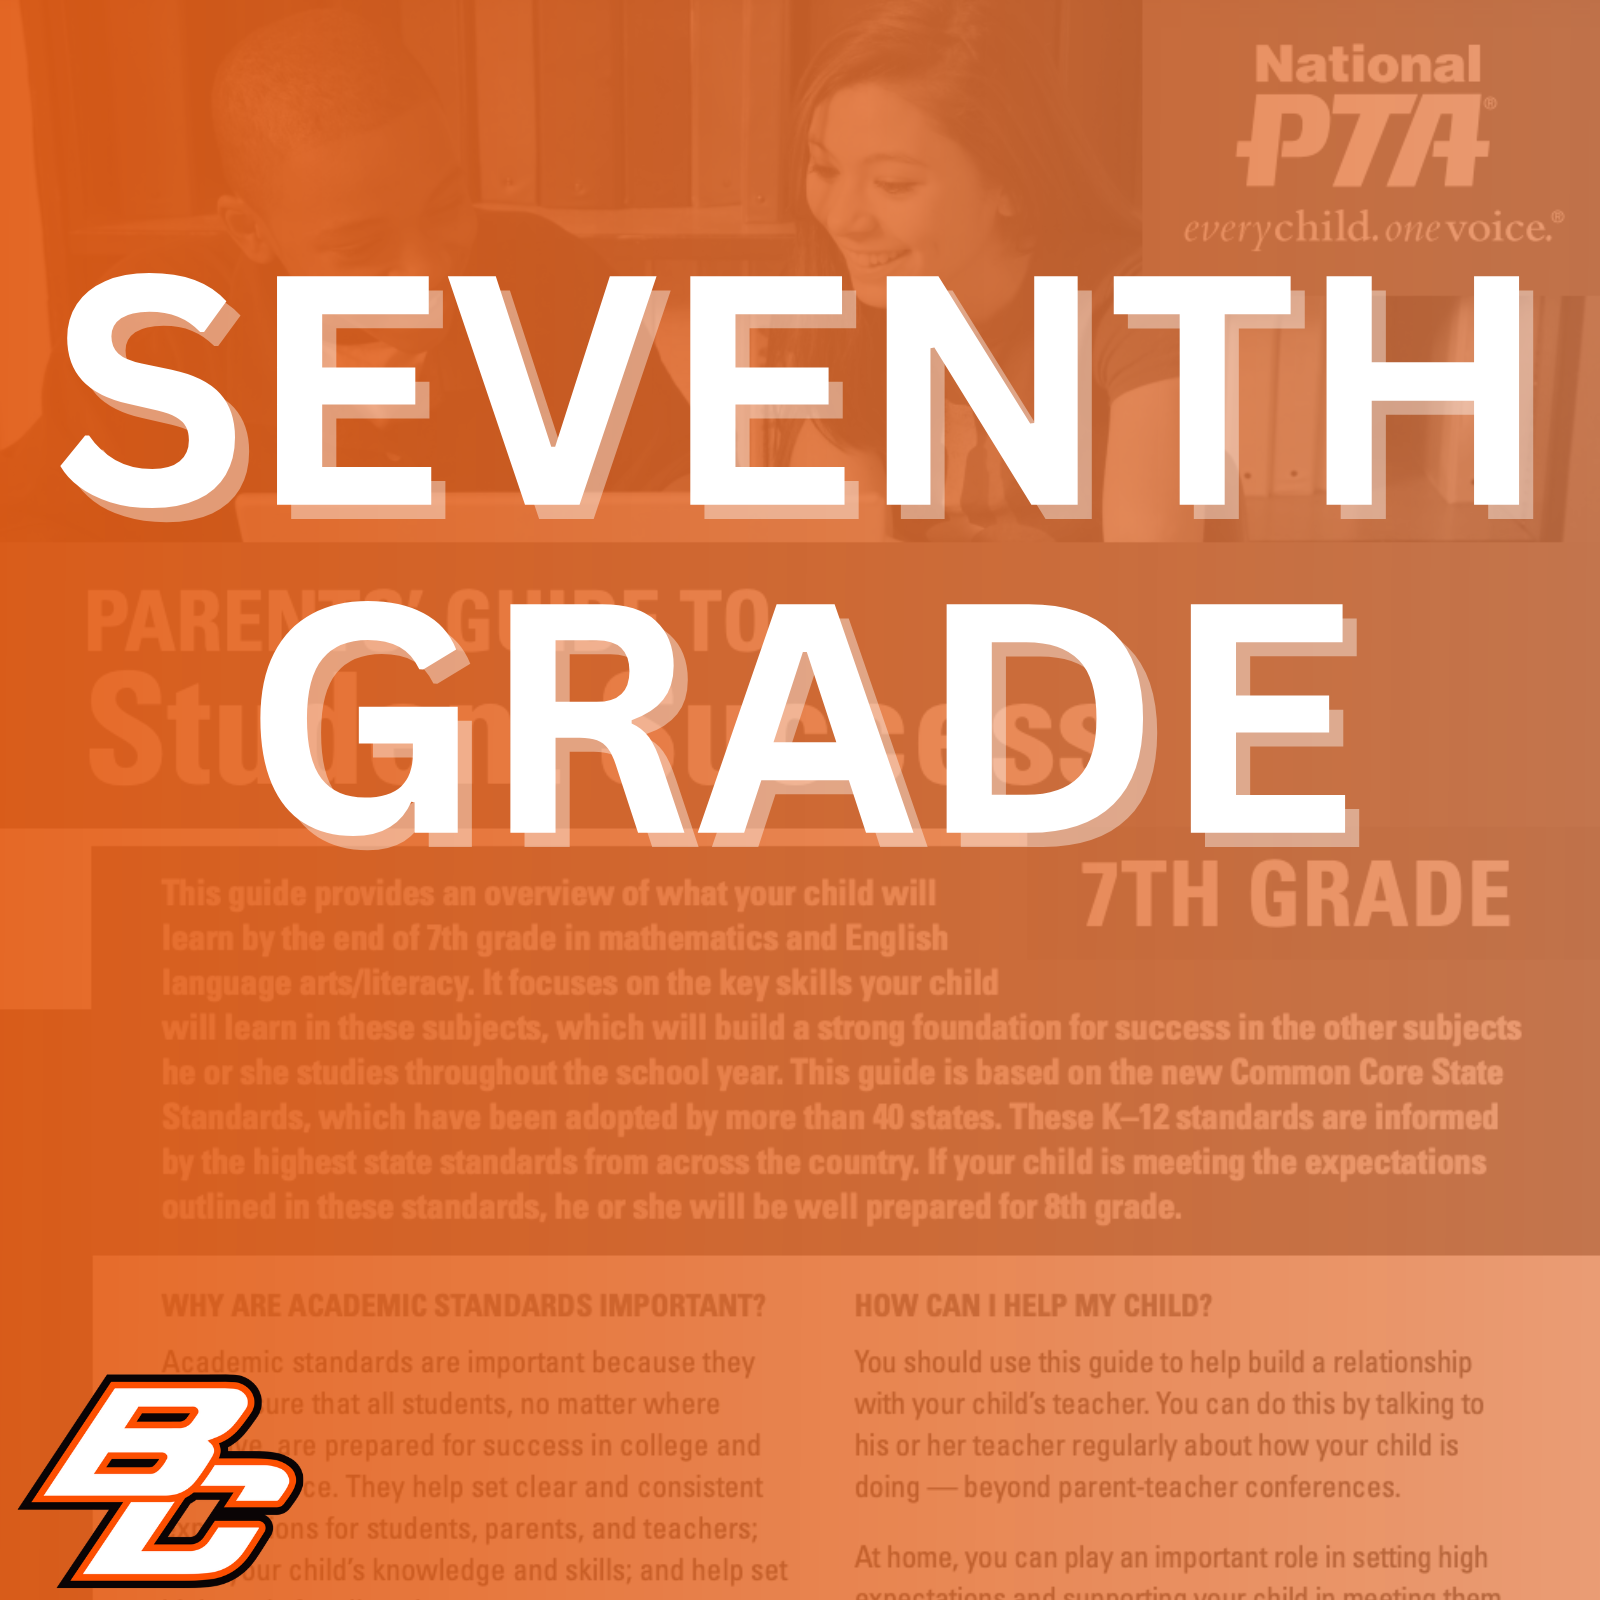 Parent’s Guide to Student Success for 7th grade: This guide provides an overview of what your child will learn by the end of 7th grade in mathematics and English language arts/literacy. It focuses on the key skills your child will learn in these subjects, which will build a strong foundation for success in the other subjects he or she studies throughout the school year. This guide is based on the new Common Core State Standards, which have been adopted by more than 40 states. These K-12 standards are informed by the highest state standards from across the country. If your child is meeting the expectations outlined in these standards, he or she will be well prepared for 8th grade.  Why are academic standards important? Academic standards are important because they help ensure that all students, no matter where they live, are prepared for success in college and the workforce. They help set clear and consistent expectations for students, parents, and teachers; build your child's knowledge and skills; and help set high goals for all students.  Of course, high standards are not the only thing needed for our children's success. But standards provide an important first step - a clear roadmap for learning for teachers, parents, and students. Having clearly defined goals helps families and teachers work together to ensure that students succeed. Standards help parents and teachers know when students need extra assistance or when they need to be challenged even more. They also will help your child develop critical thinking skills that will prepare him or her for college and career.  How can I help my child? You should use this guide to help build a relationship with your child's teacher. You can do this by talking to his or her teacher regularly about how your child is doing - beyond parent-teacher conferences.  At home, you can play an important role in setting high expectations and supporting your child in meeting them. If your child needs a little extra help or wants to learn more about a subject, work with his or her teacher to identify opportunities for tutoring, to get involved in clubs after school, or to find other resources.  This guide includes: An overview of some of the key things your child will learn in English/literacy and math in 7th grade, ideas for activities to help your child learn at home and topics of discussion for talking to your child's teacher about his or her academic progress.